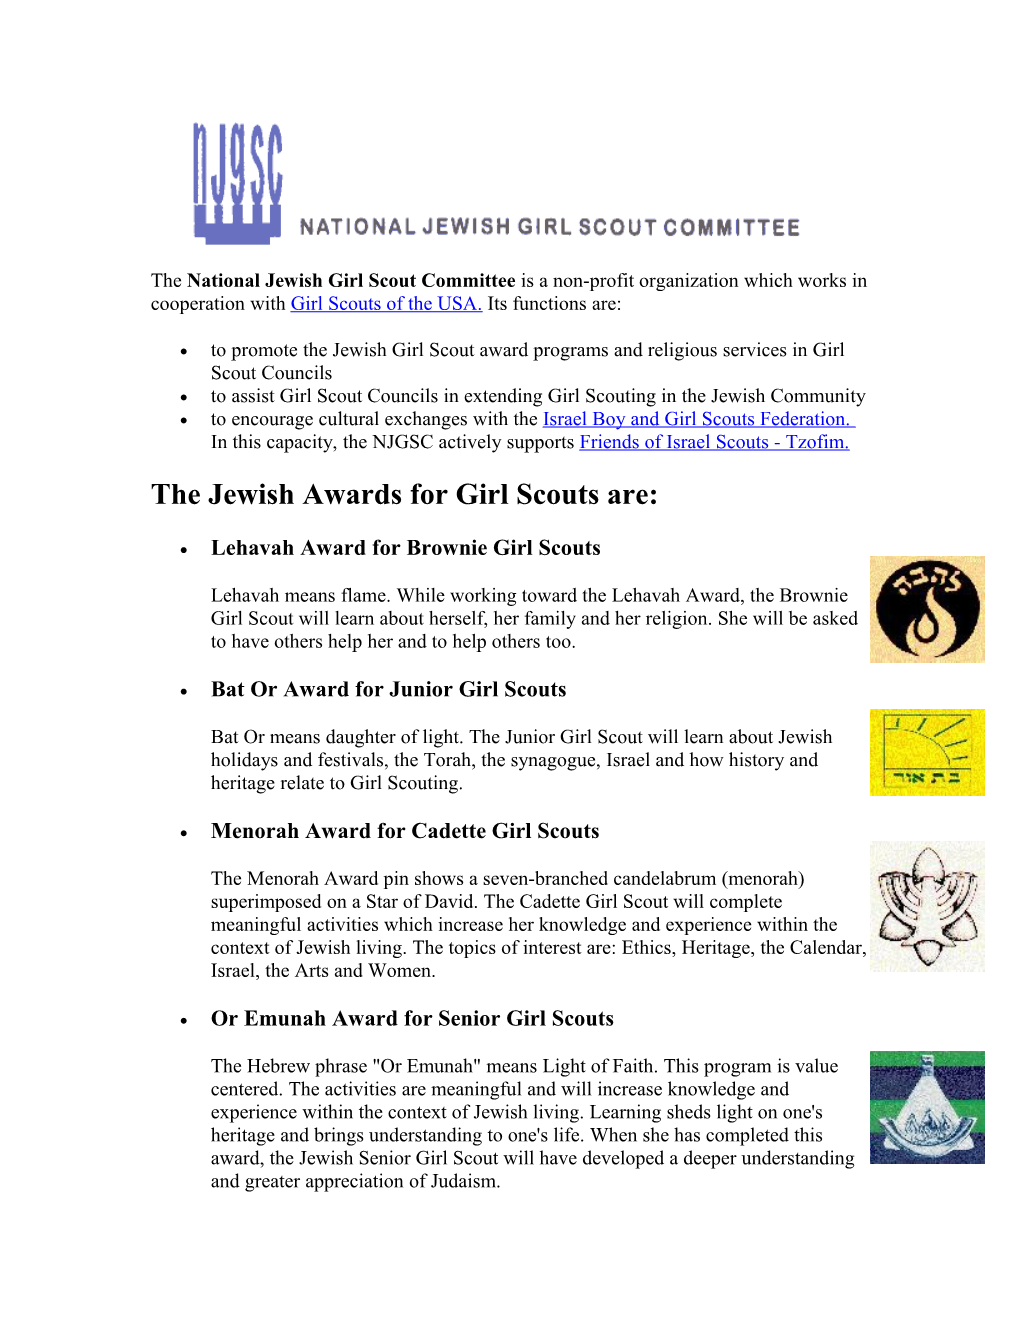 To Assist Girl Scout Councils in Extending Girl Scouting in the Jewish Community